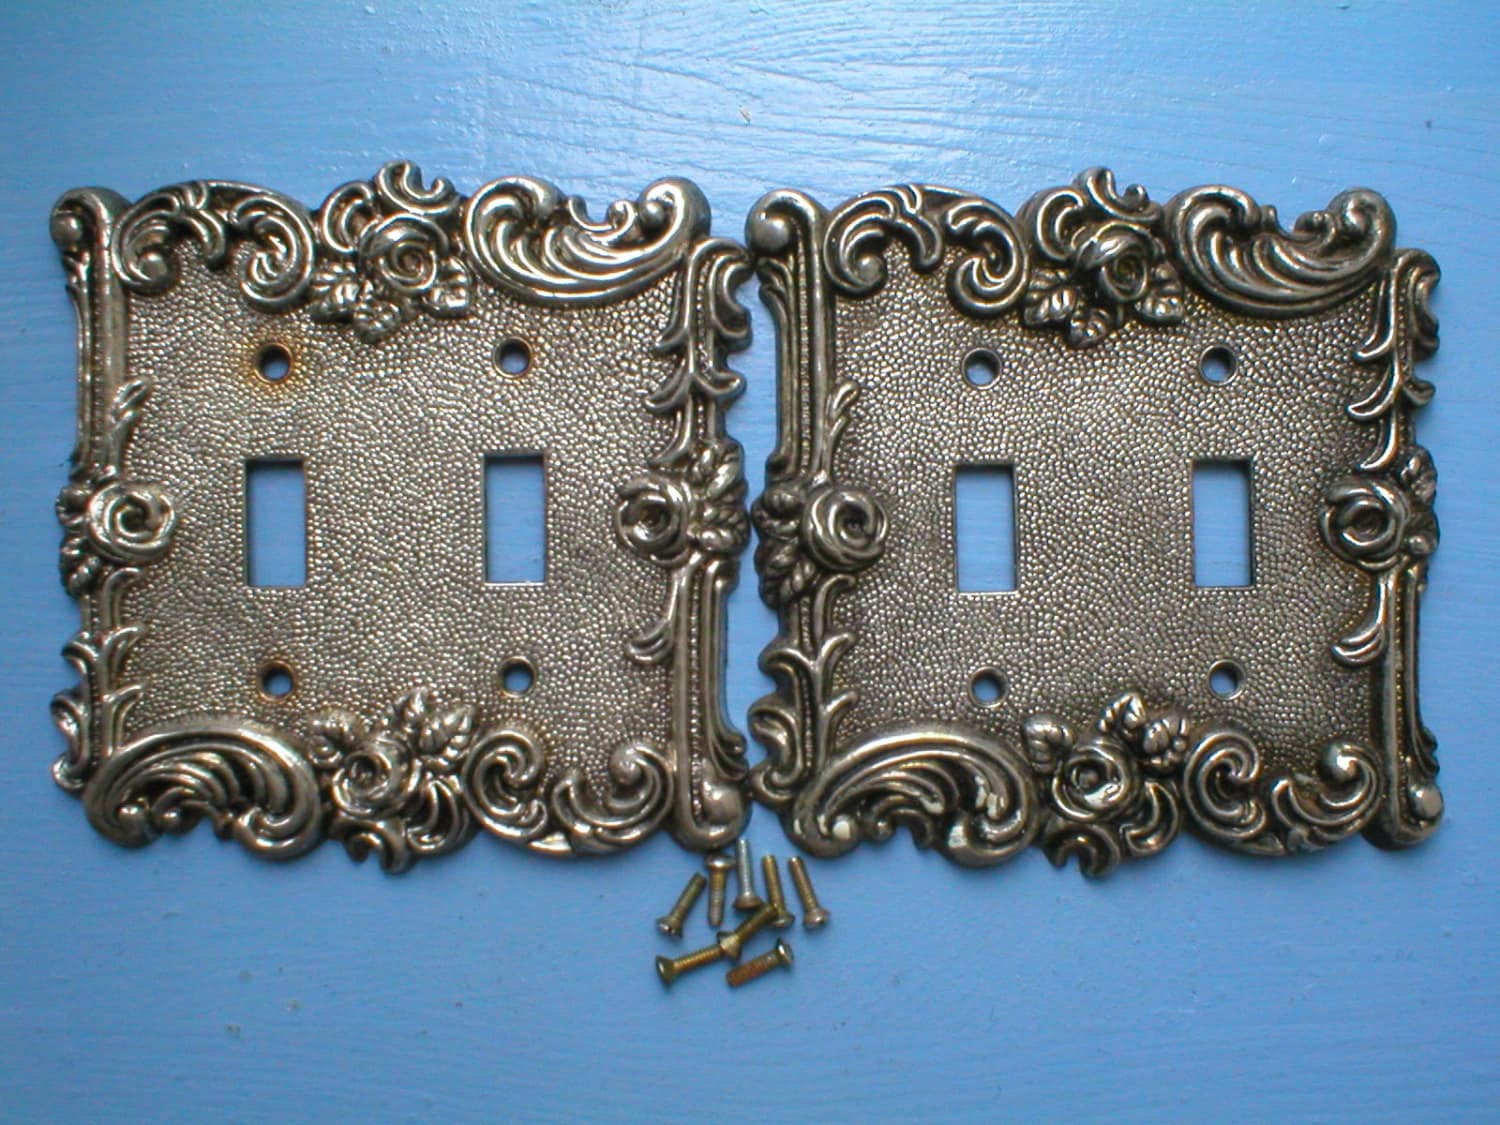 light switch covers